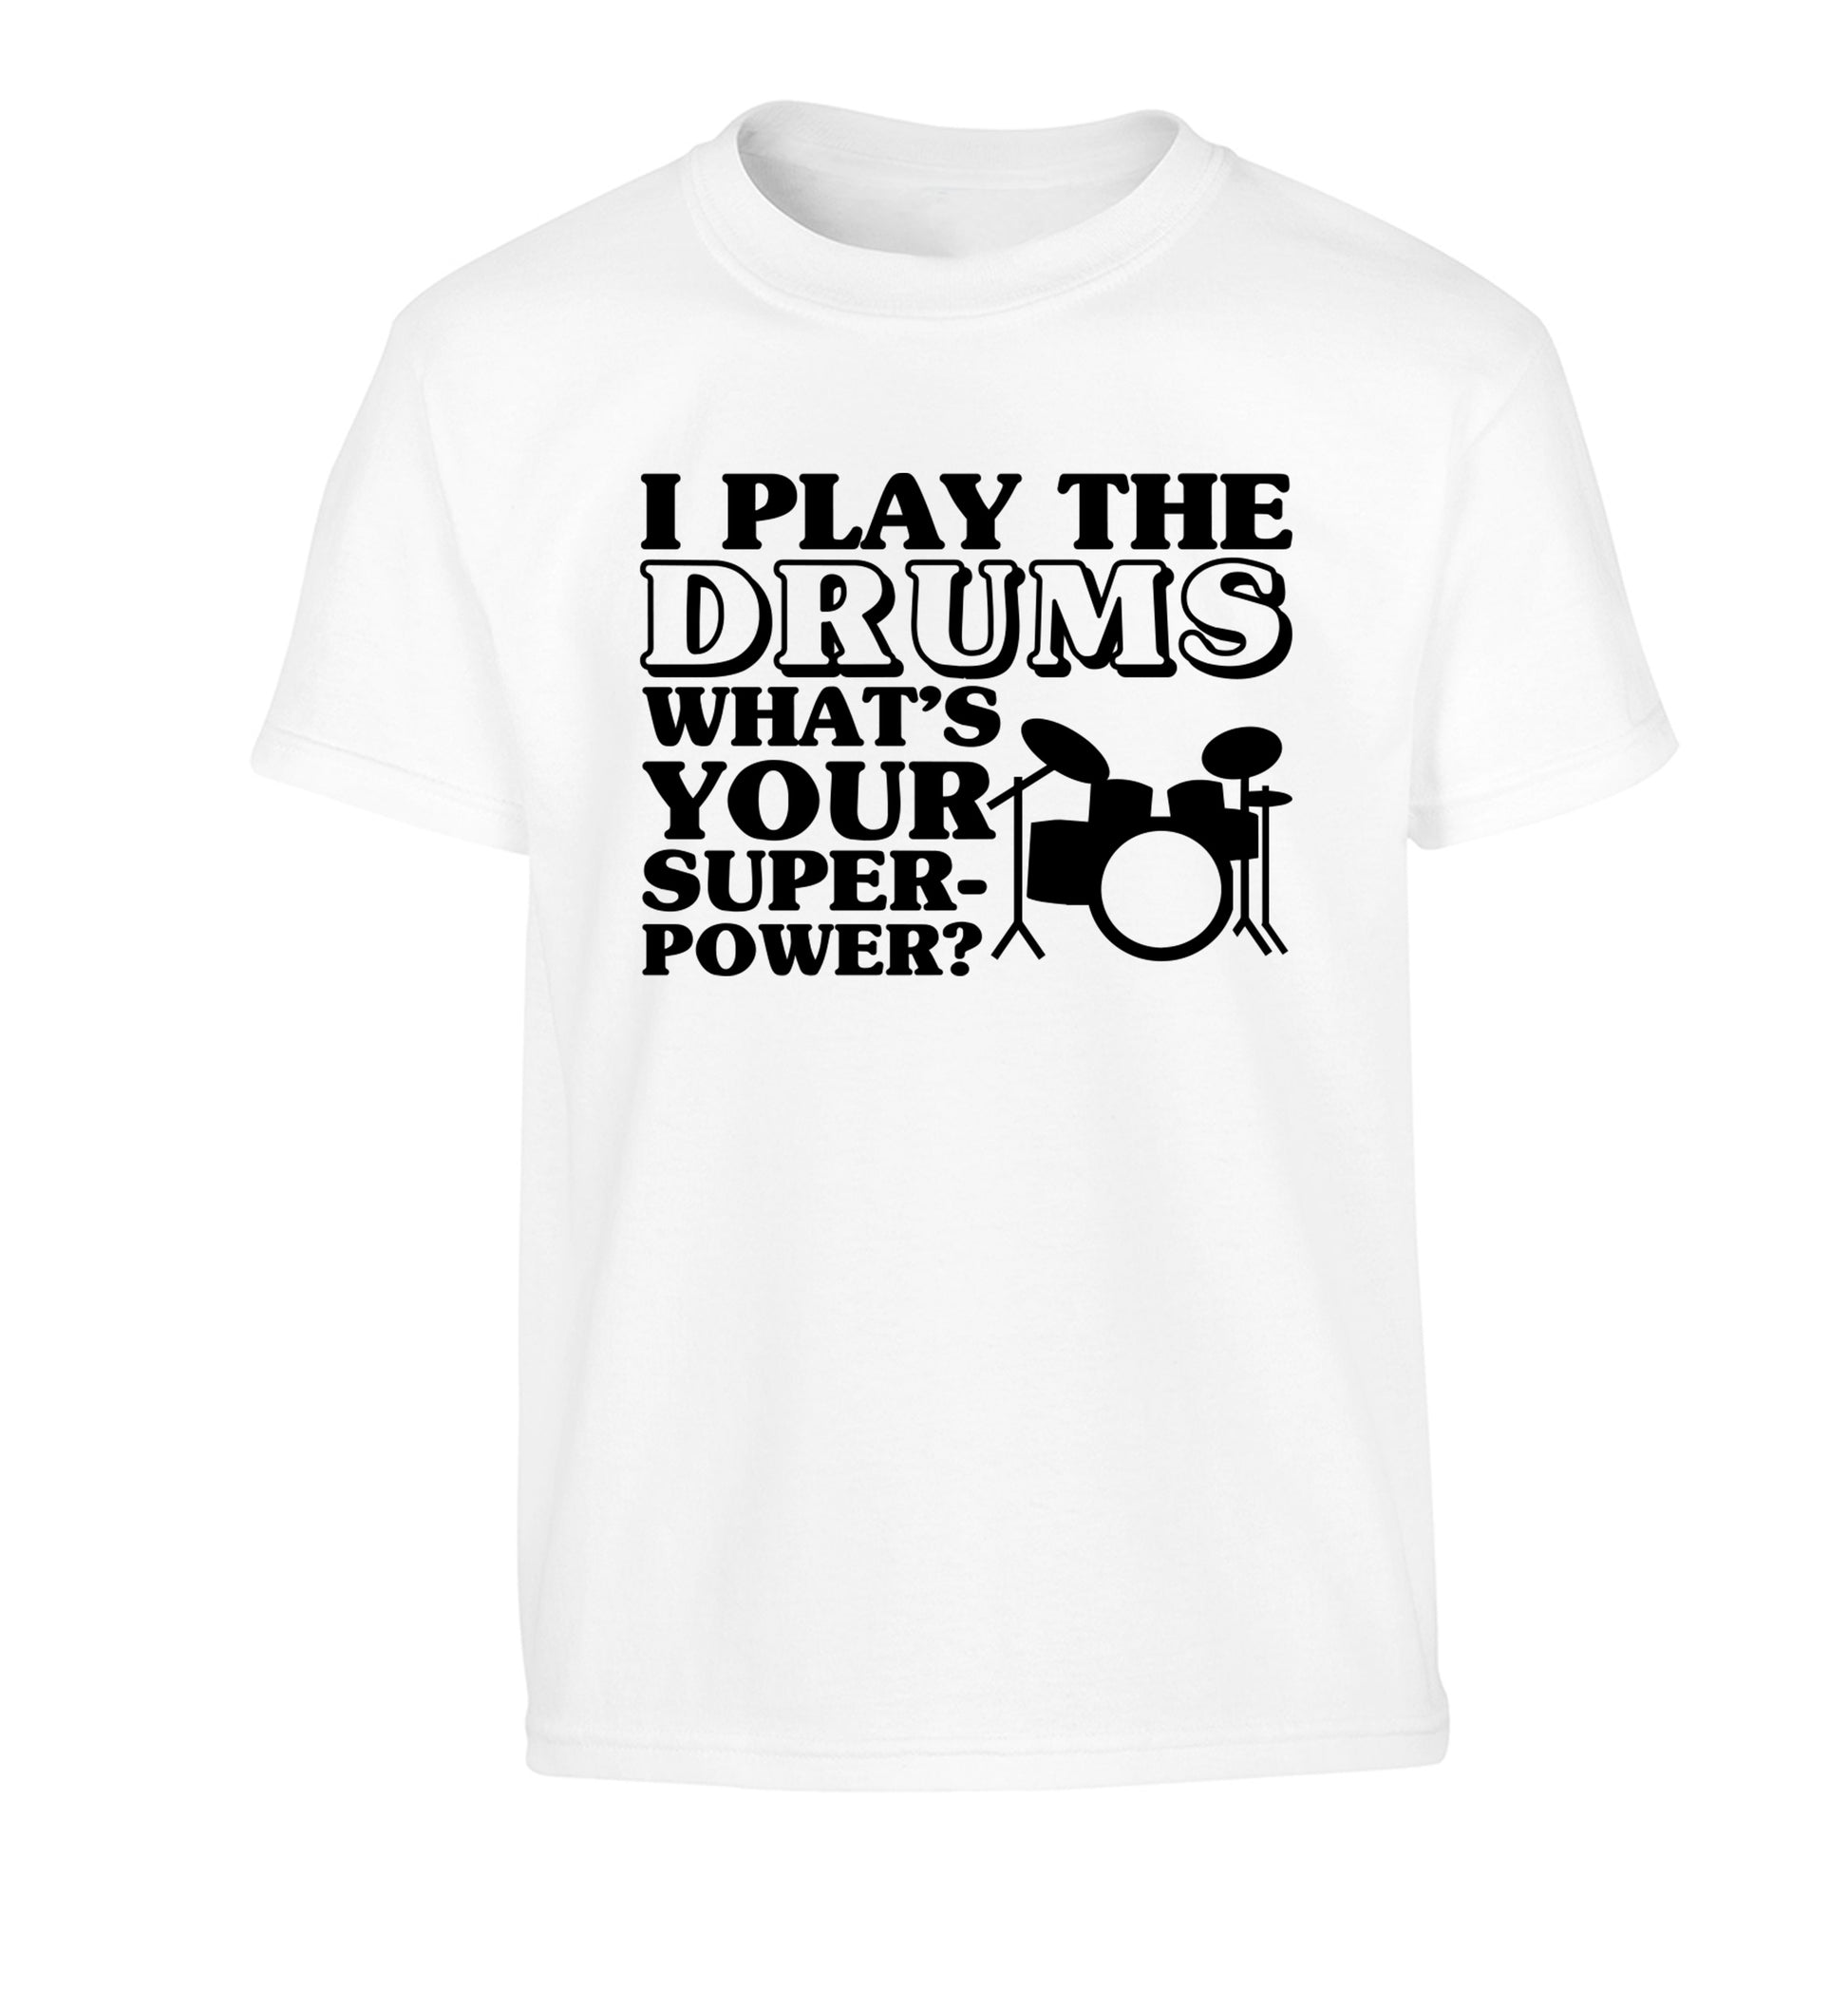 I play the drums what's your superpower? Children's white Tshirt 12-14 Years